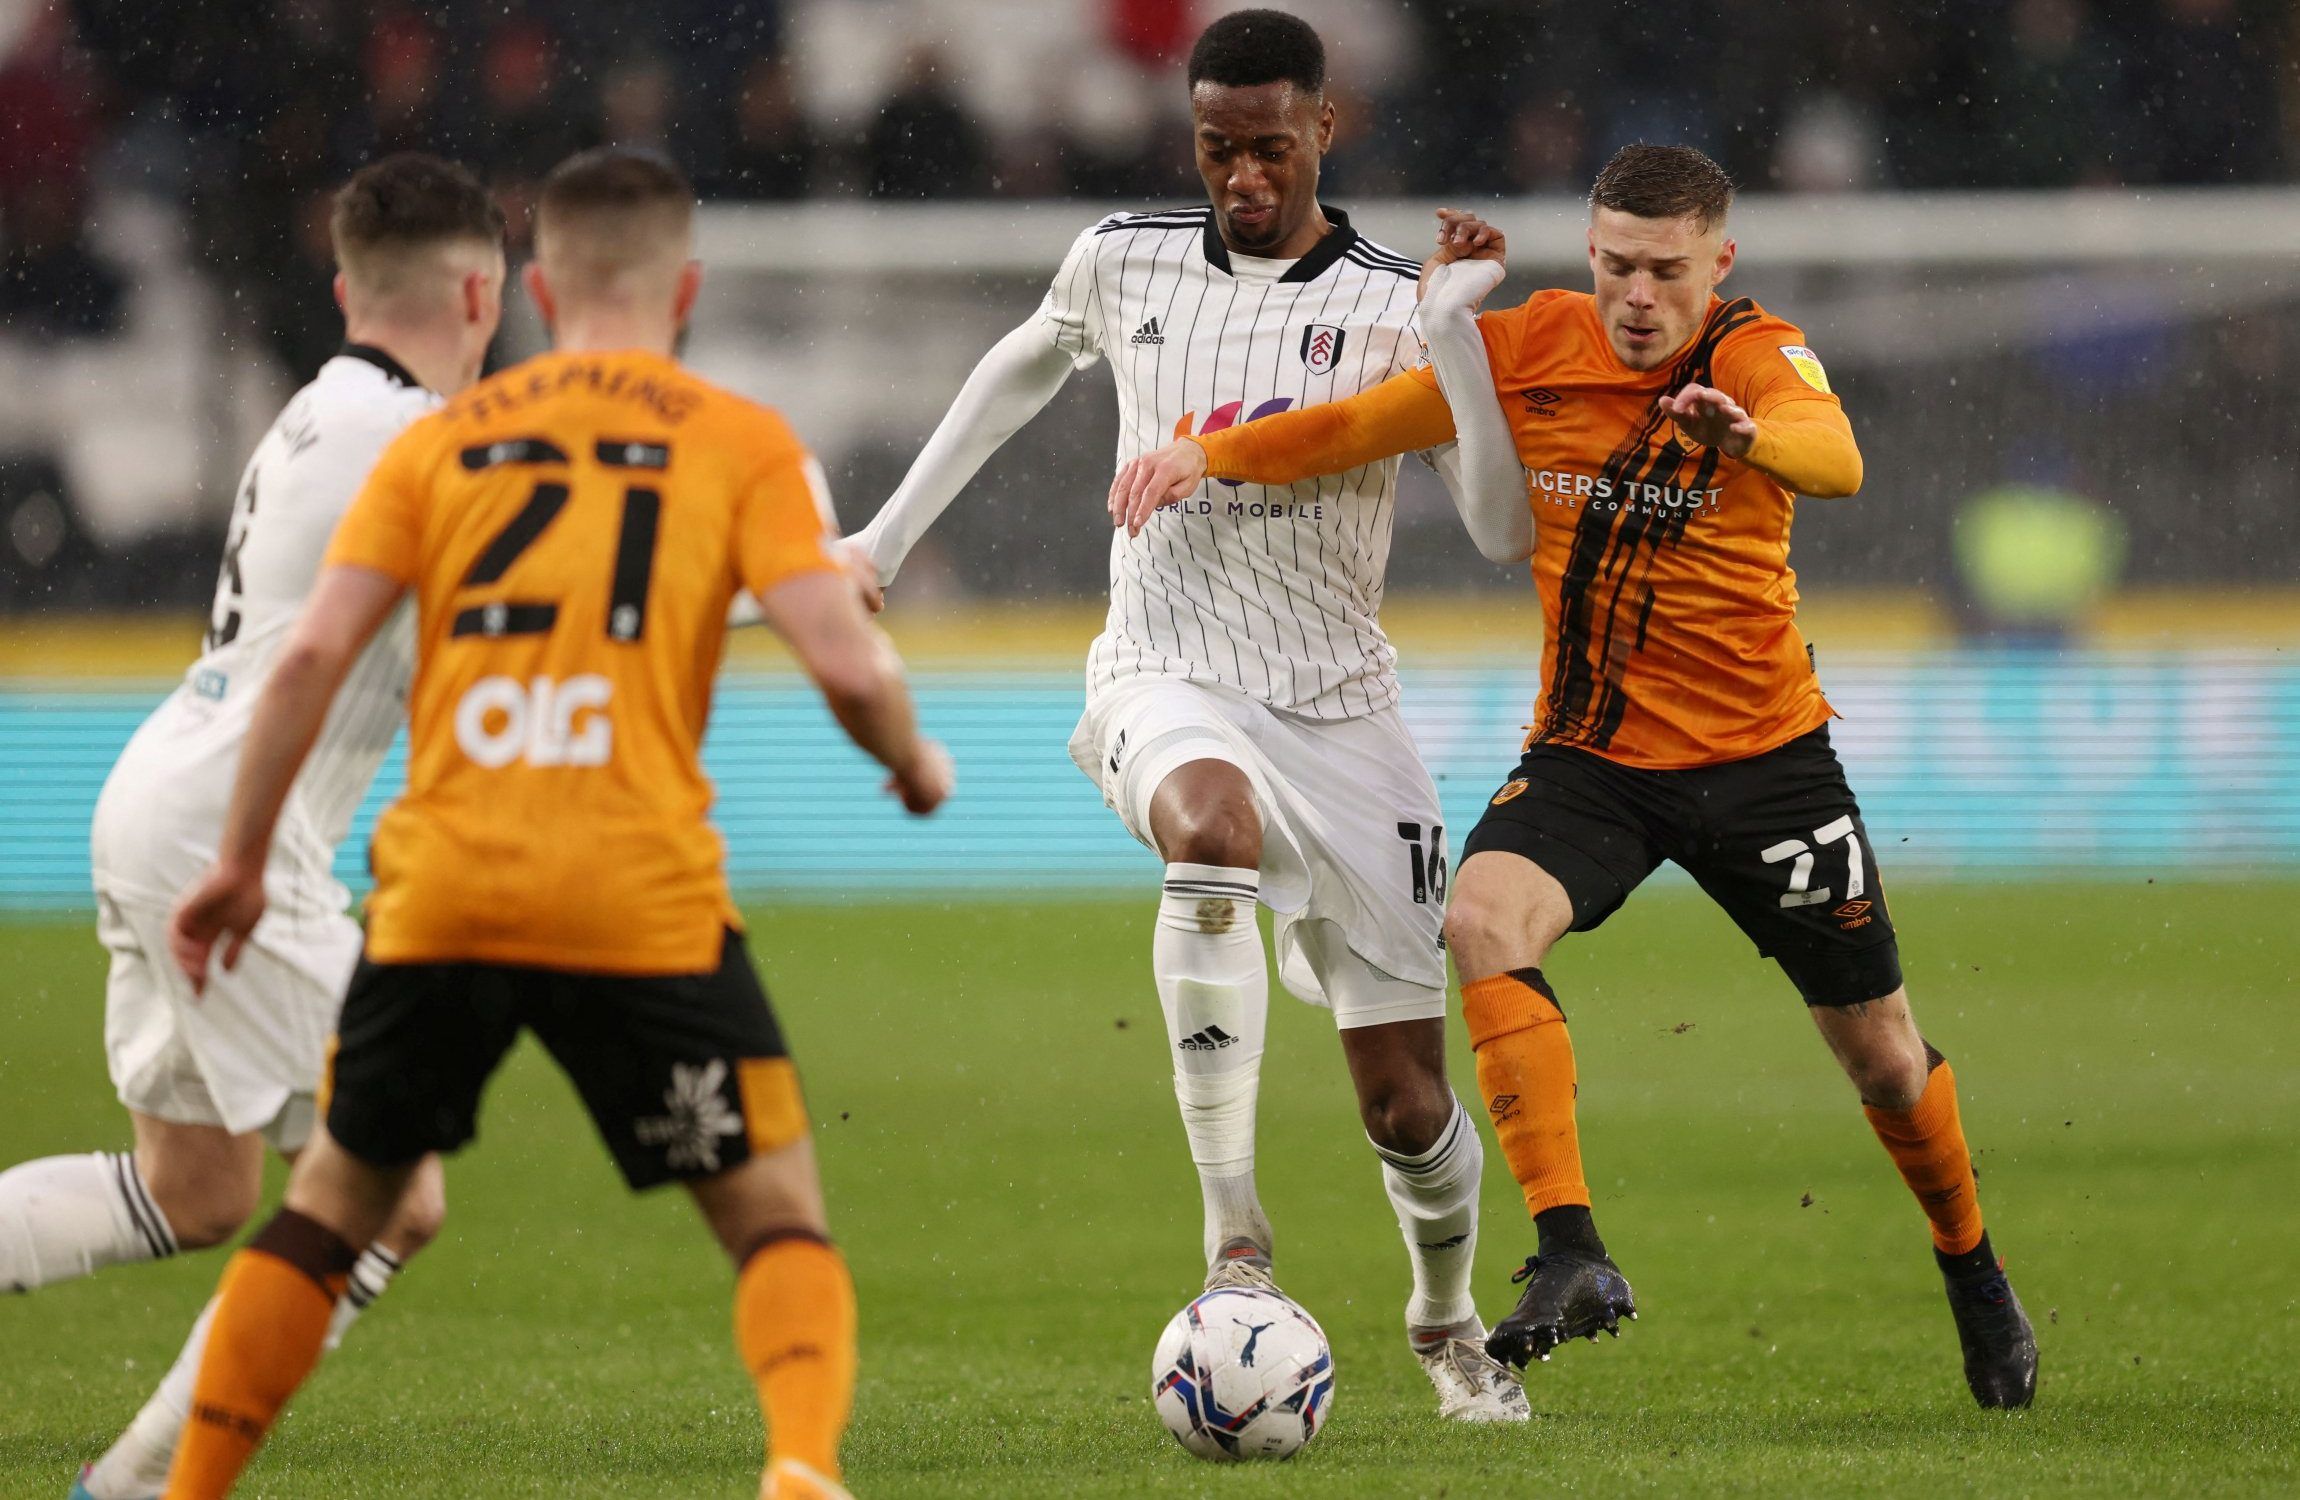  Tosin Adarabioyo of Fulham in action against Hull City during the Sky Bet Championship match at the MKM Stadium, Kingston upon Hull.